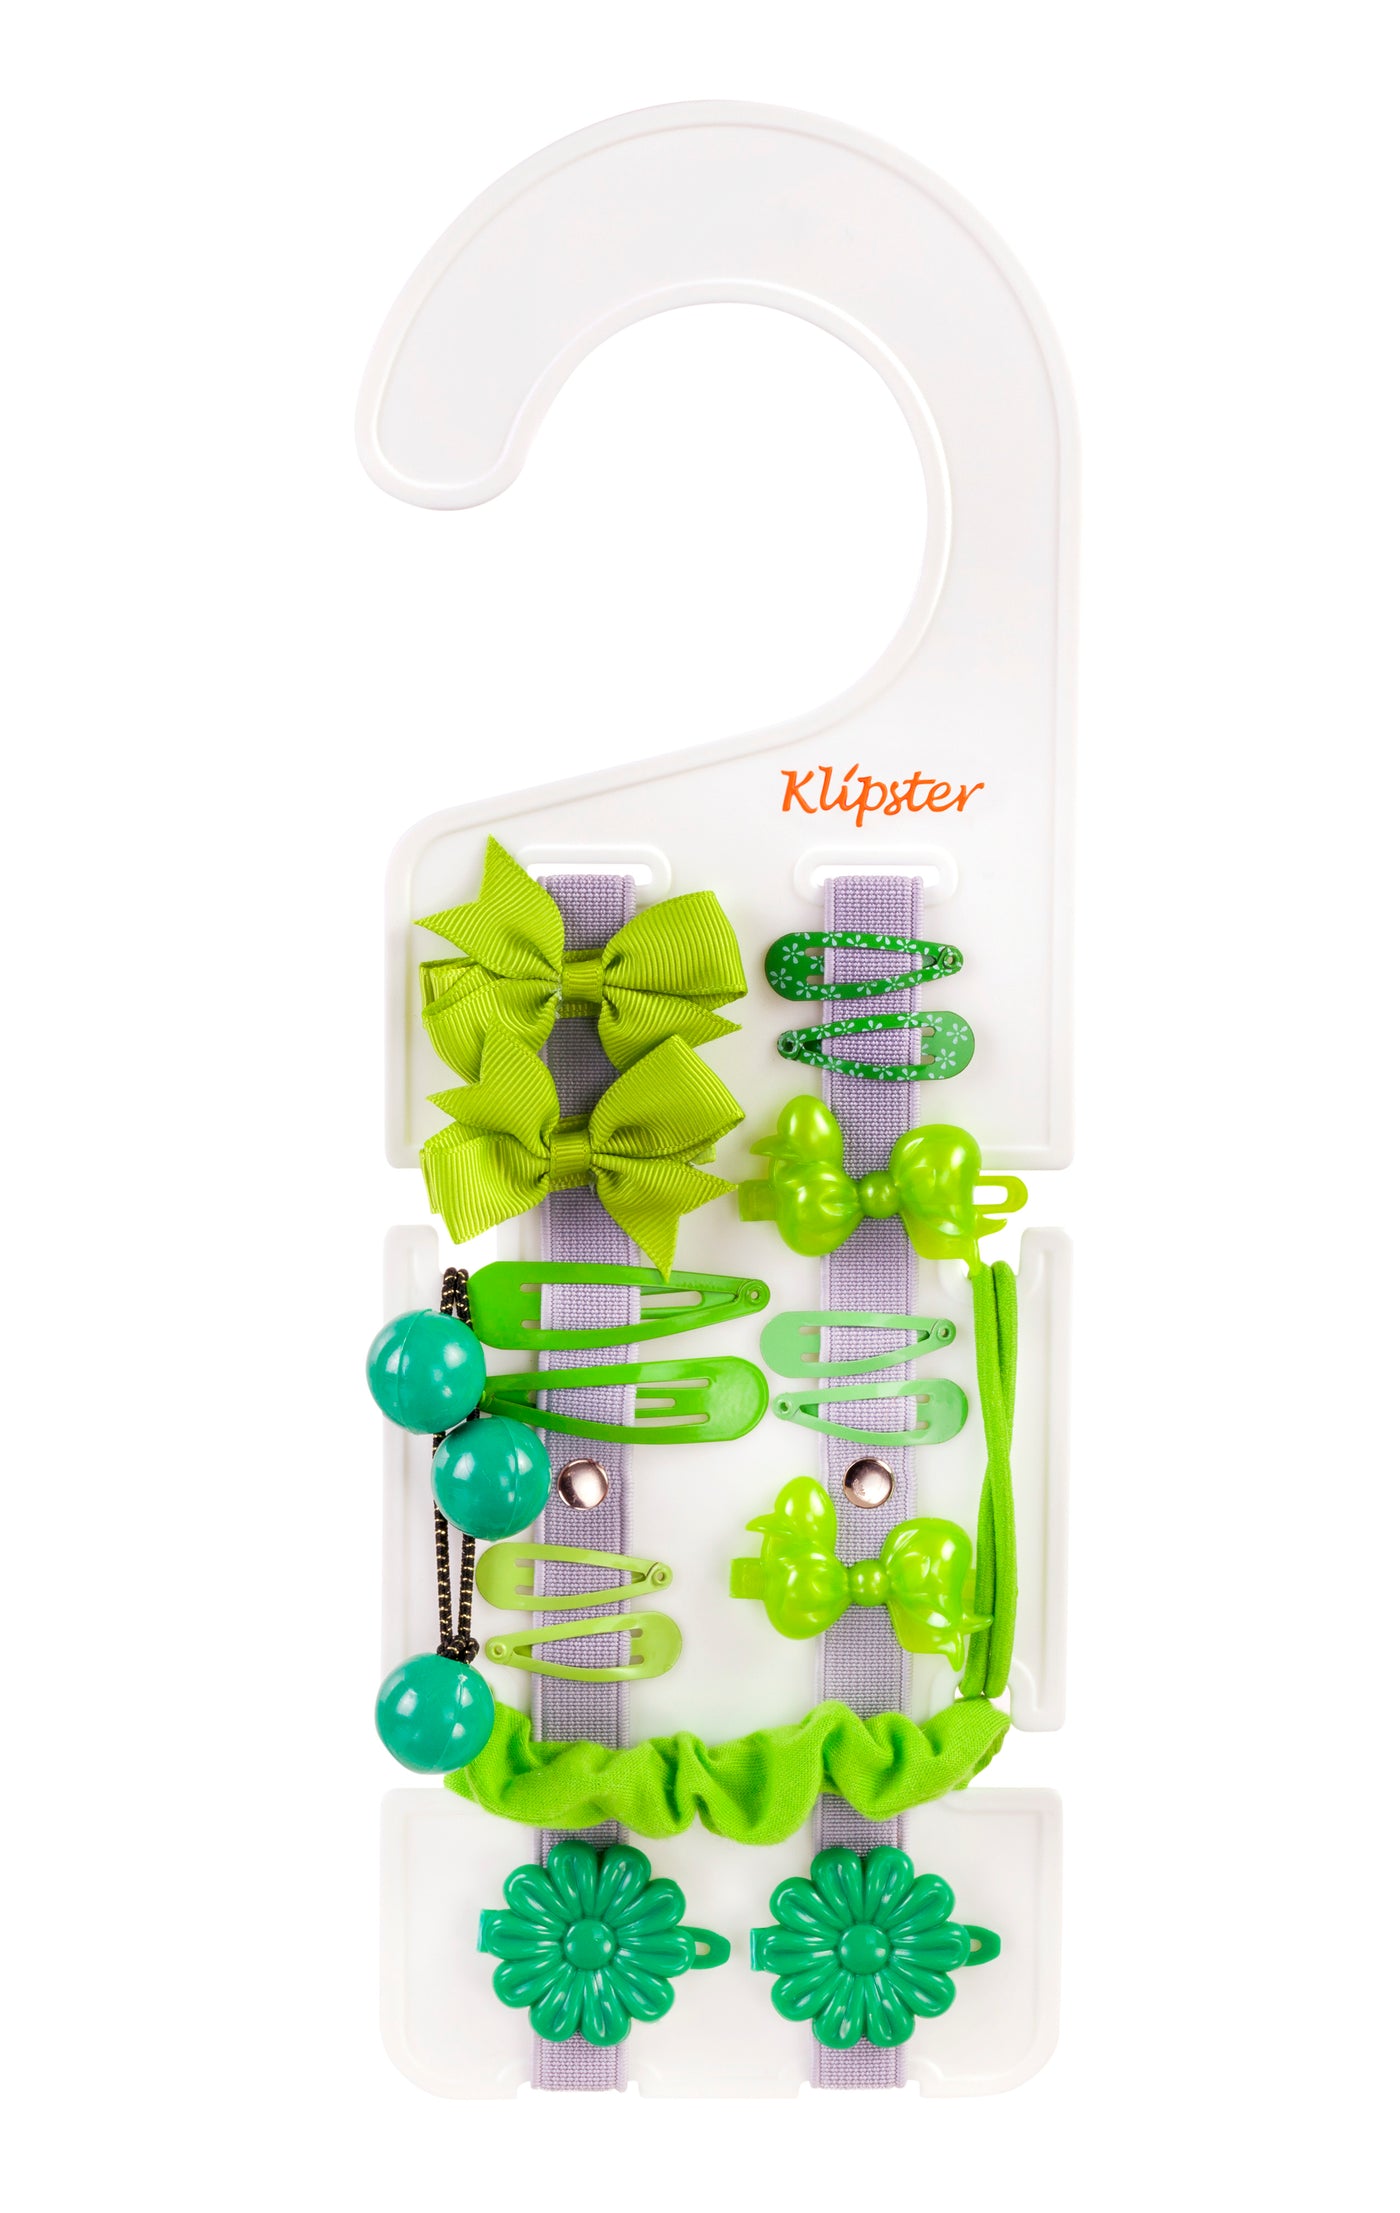 Classic Klipster Hair Accessories Organizers is double-sided, compact, lightweight, and holds hair bows, hair clips, scrunchies, hair ties, and more.